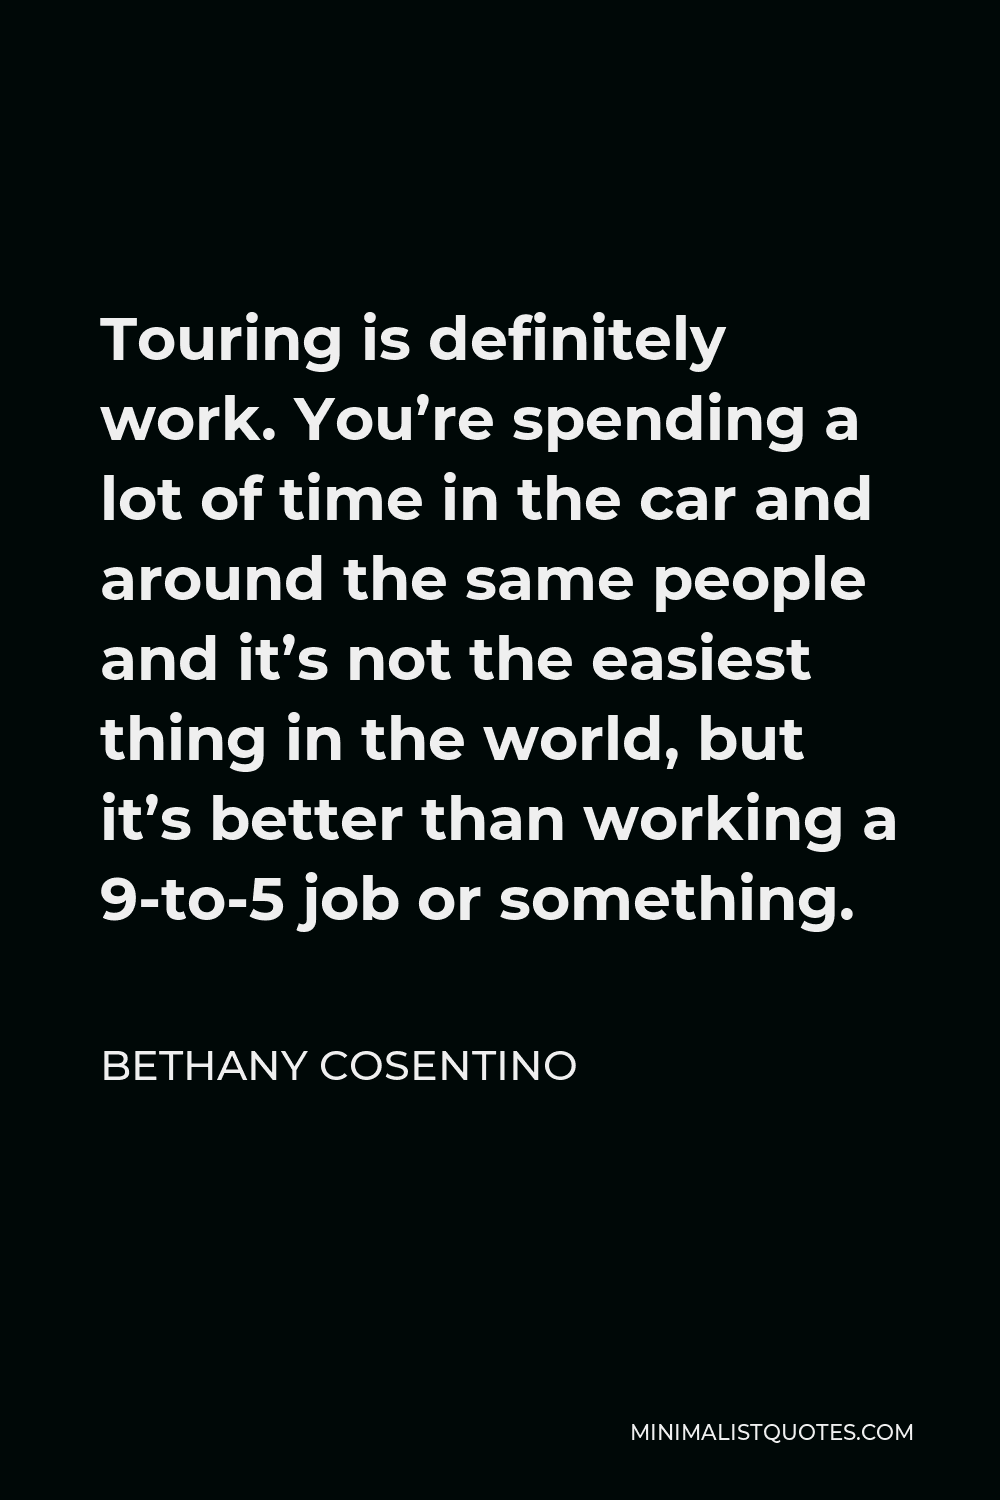 Bethany Cosentino Quote - Touring is definitely work. You’re spending a lot of time in the car and around the same people and it’s not the easiest thing in the world, but it’s better than working a 9-to-5 job or something.